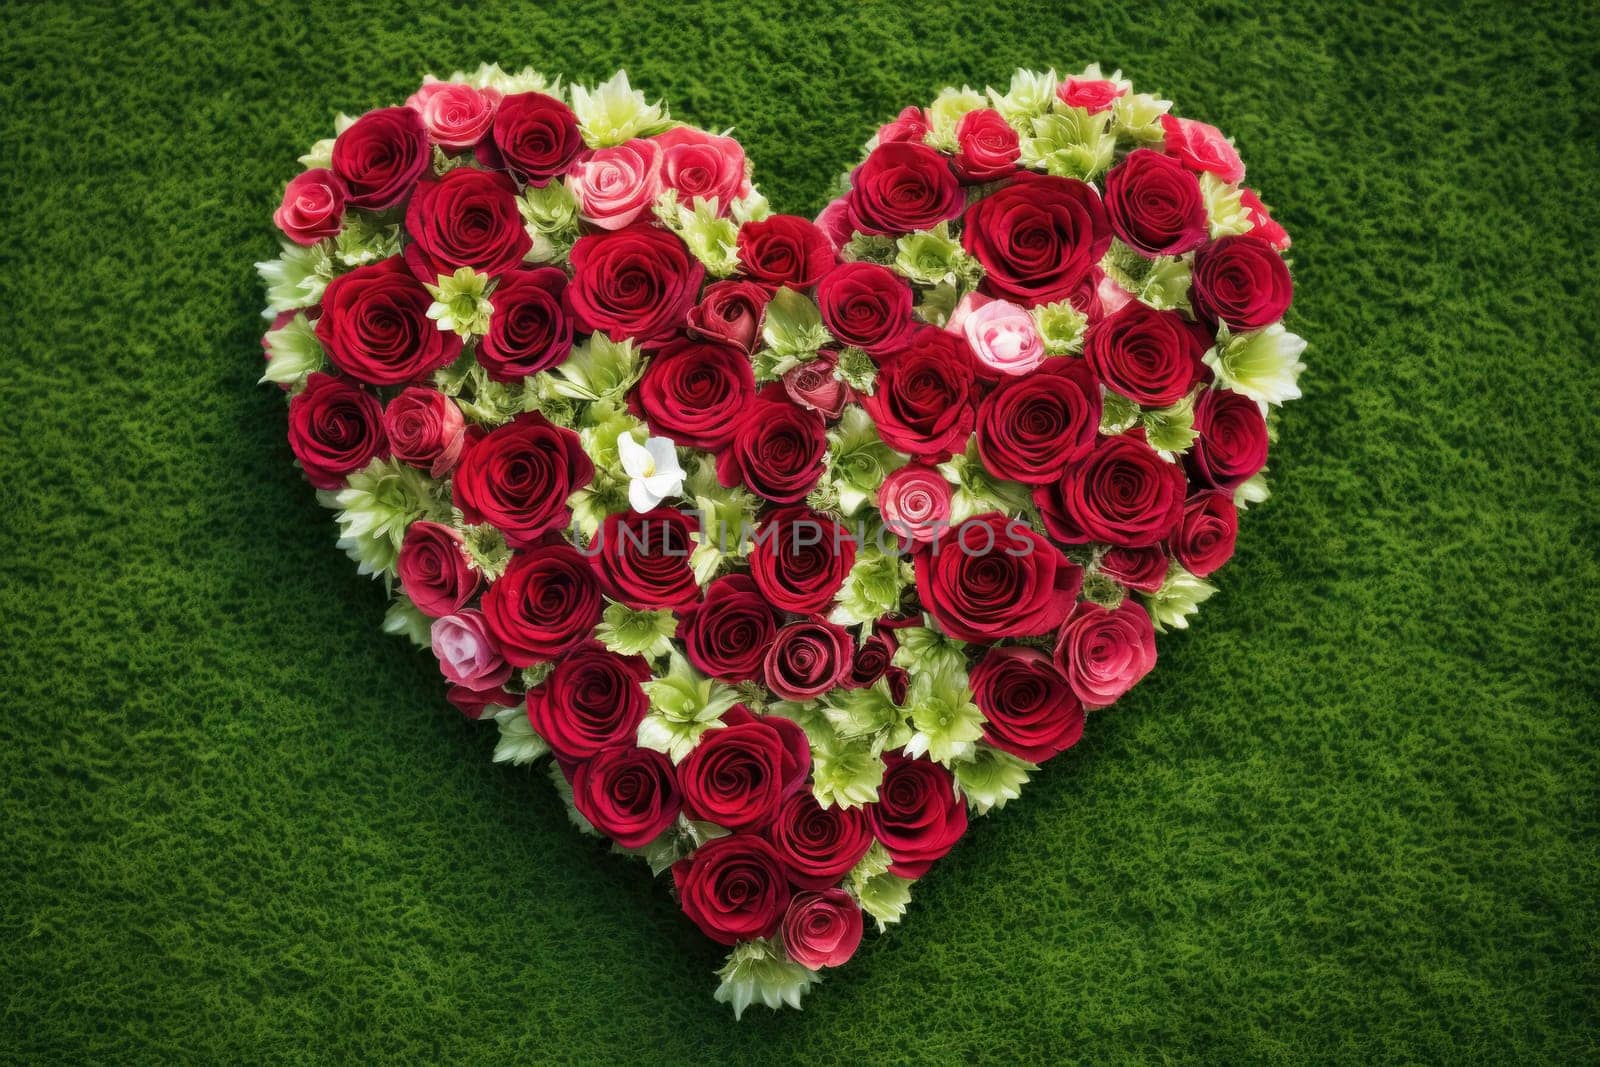 Romantic Red Roses Heart on Green Grass by andreyz